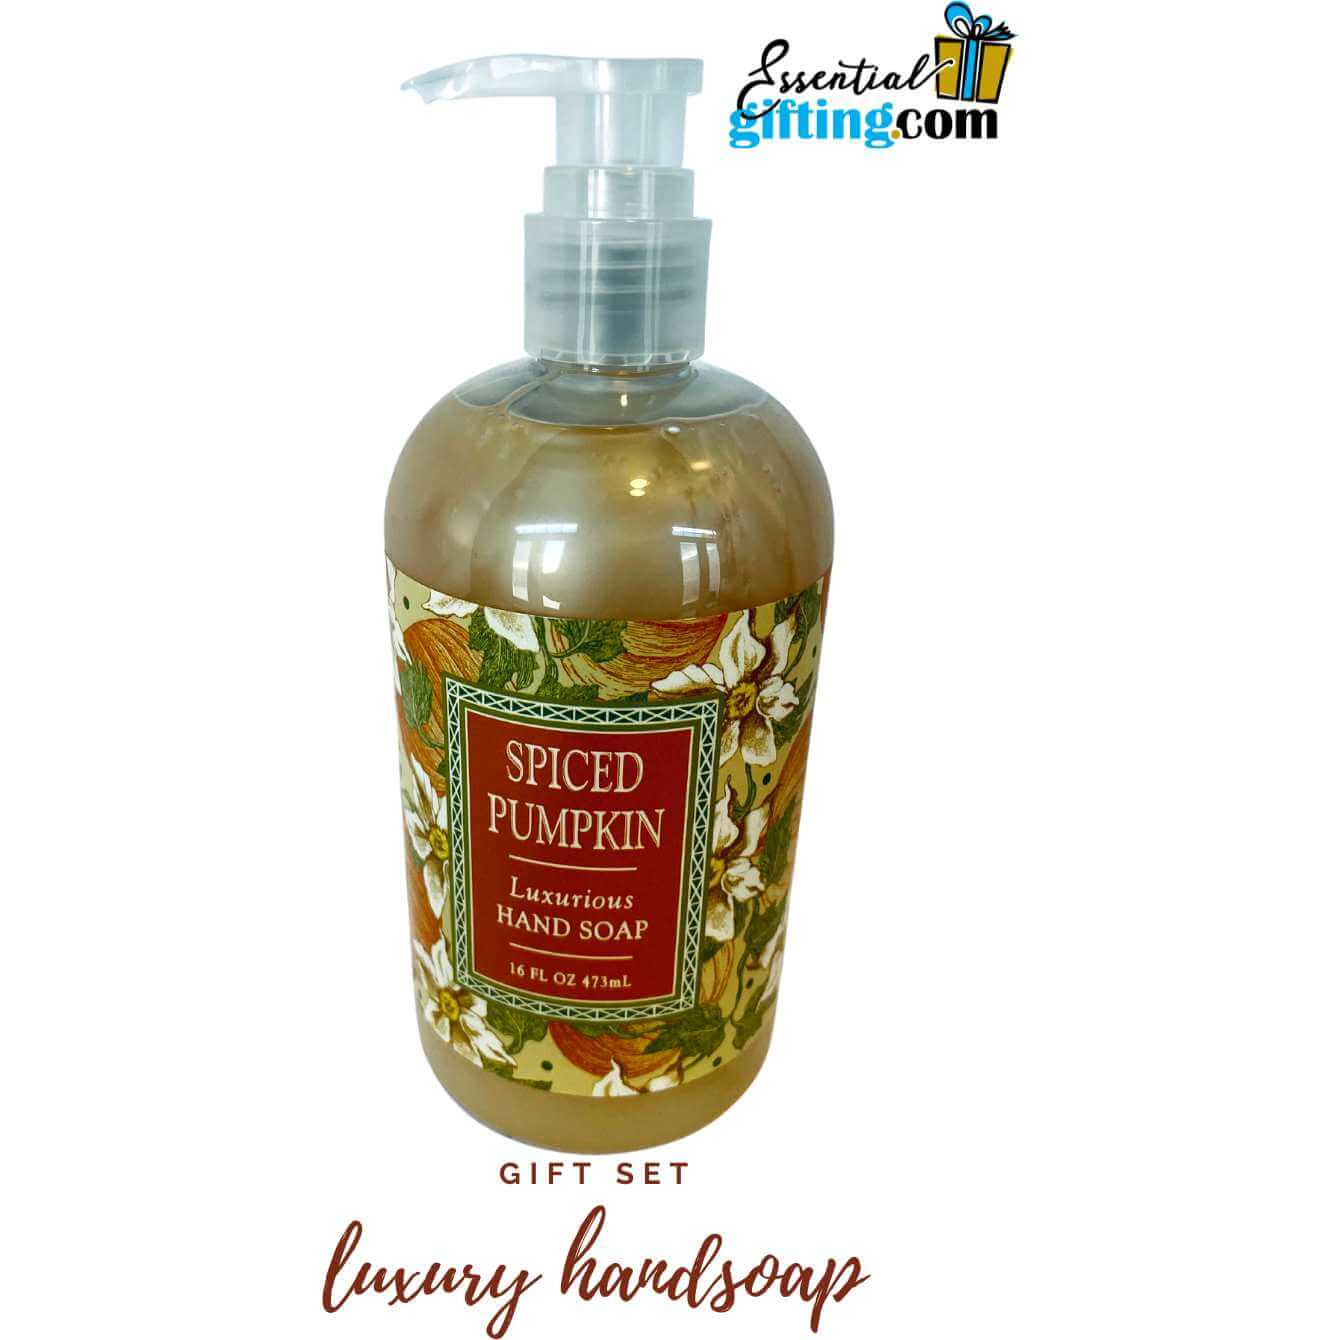 https://essentialgifting.com/products/kitchen-hand-soap-spiced-pumpkin